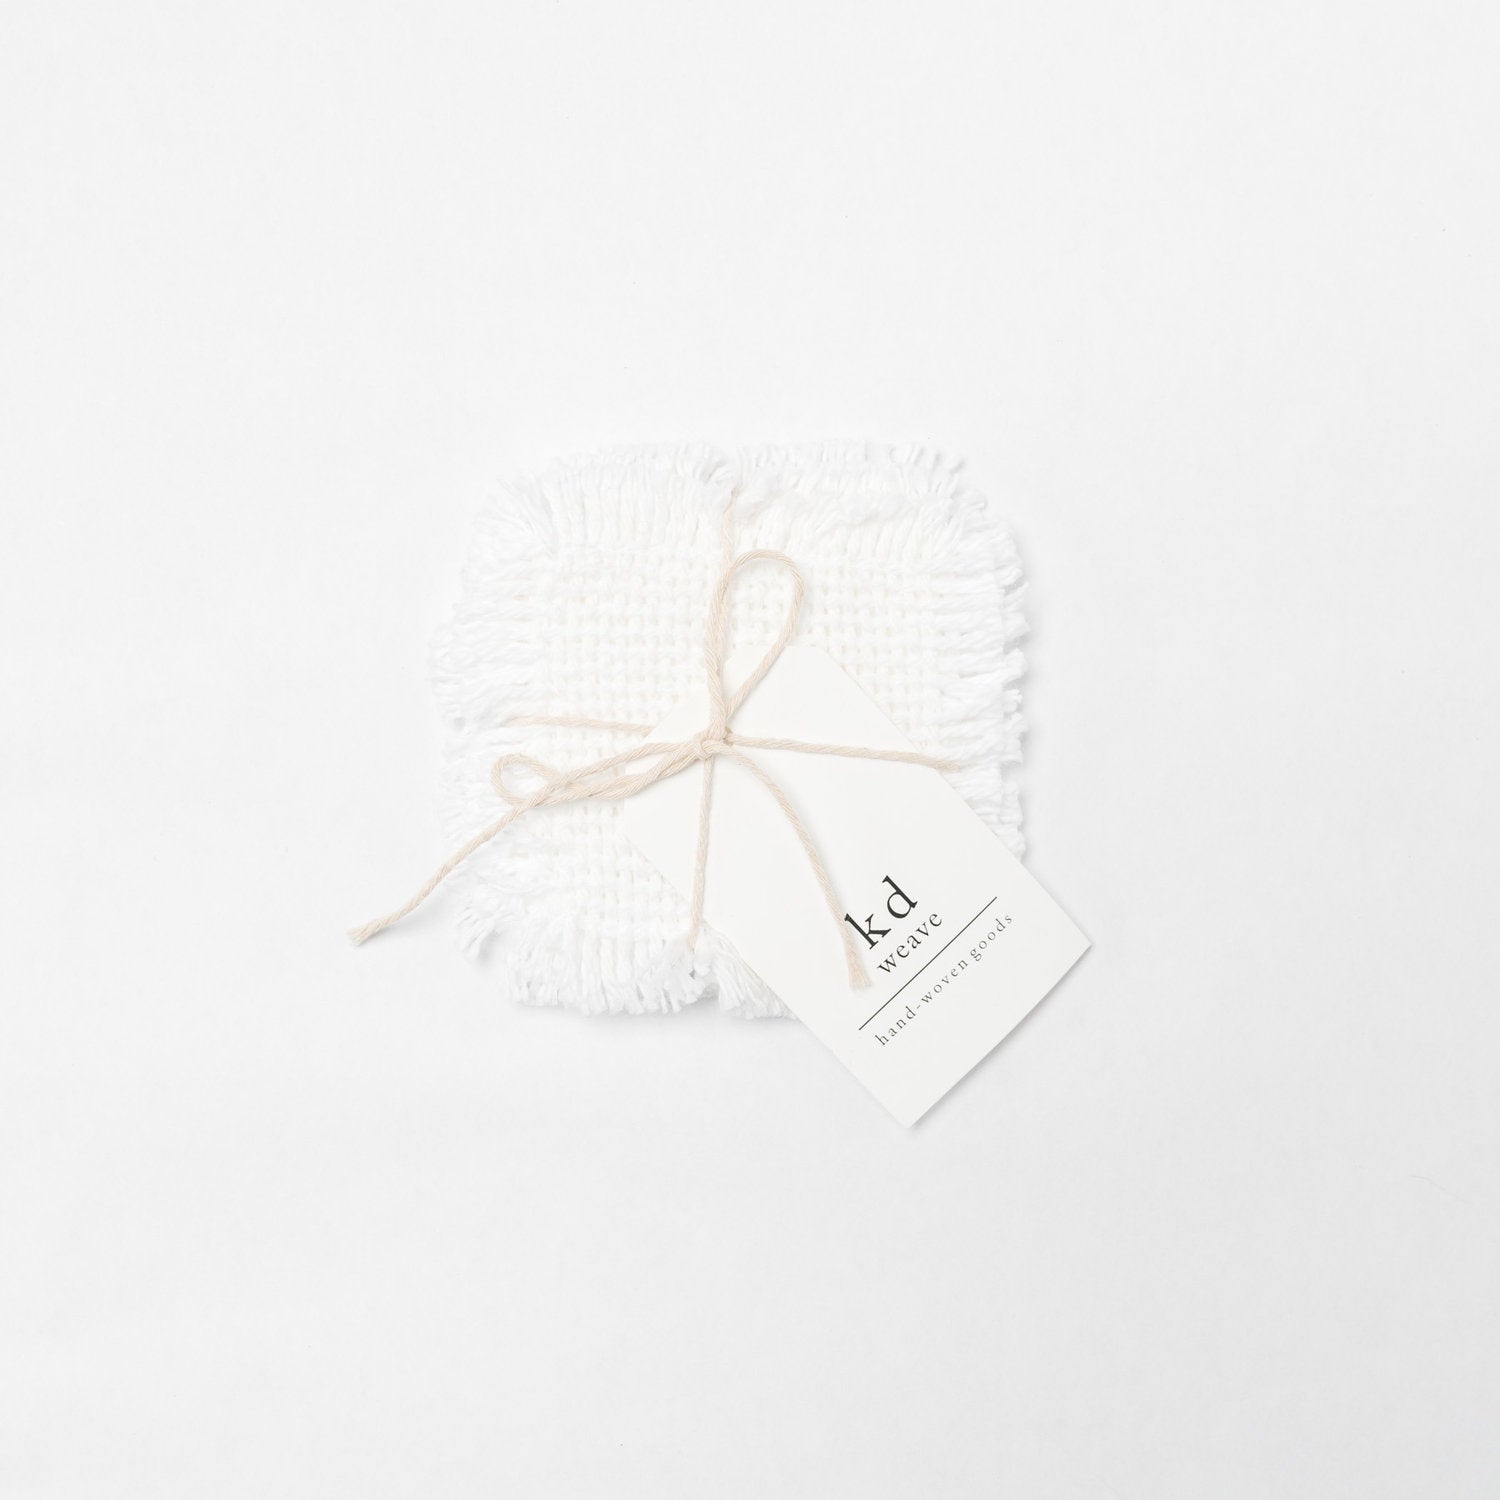 KD Weave White Coasters, Set of 4